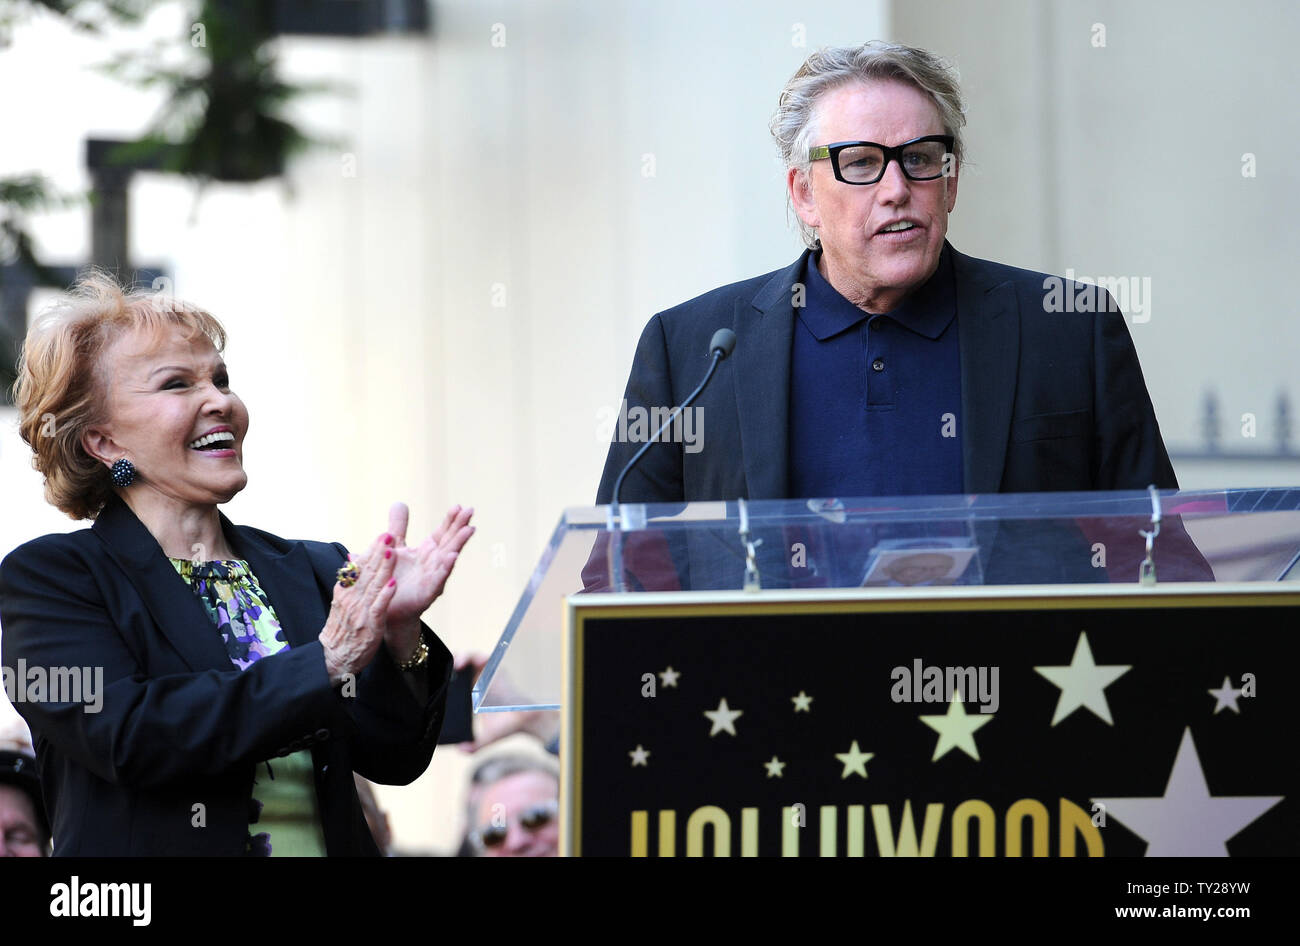 The late Buddy Holly received a posthumous Walk of Fame Star on his 75th birthday on Vine Street in front of The Capitol Records Building in Los Angeles on September 7, 2011. His widow, Maria Elena Holly who made a rare appearance at the event, listens as Gary Busey puts on 'Buddy Holly' style glasses and says a few words. Busey starred as Holly in the move The Buddy Holly Story.   UPI/Jayne Kamin-Oncea Stock Photo